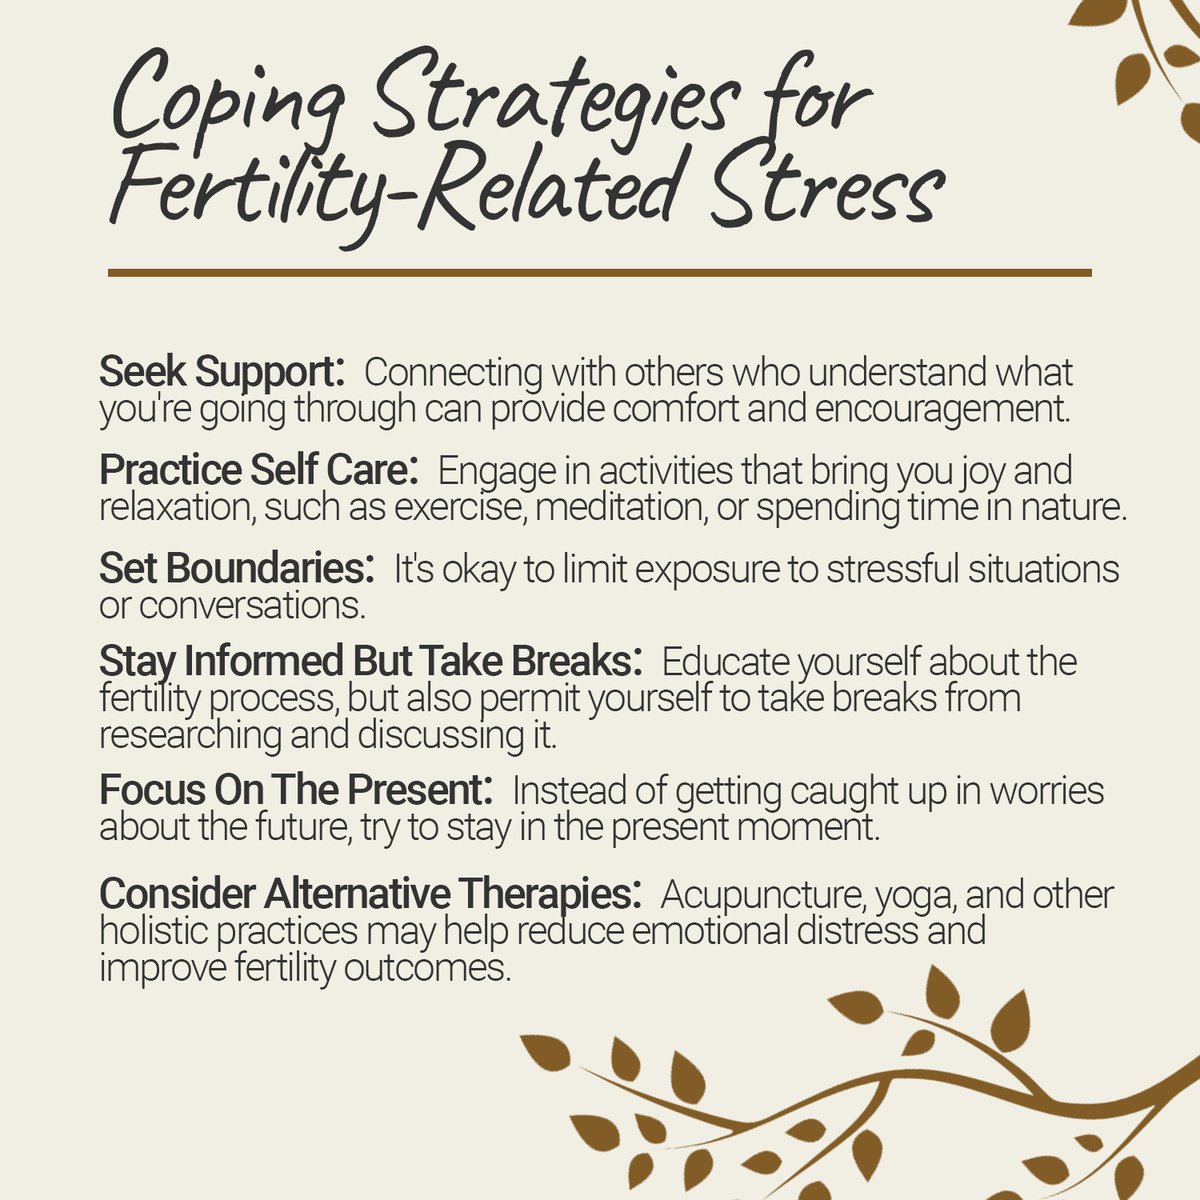 Coping with the stress of fertility treatments can be challenging. There are effective strategies that can help. 

#FertilityWellnessInstitute #JourneyToParenthood #FertilityStories